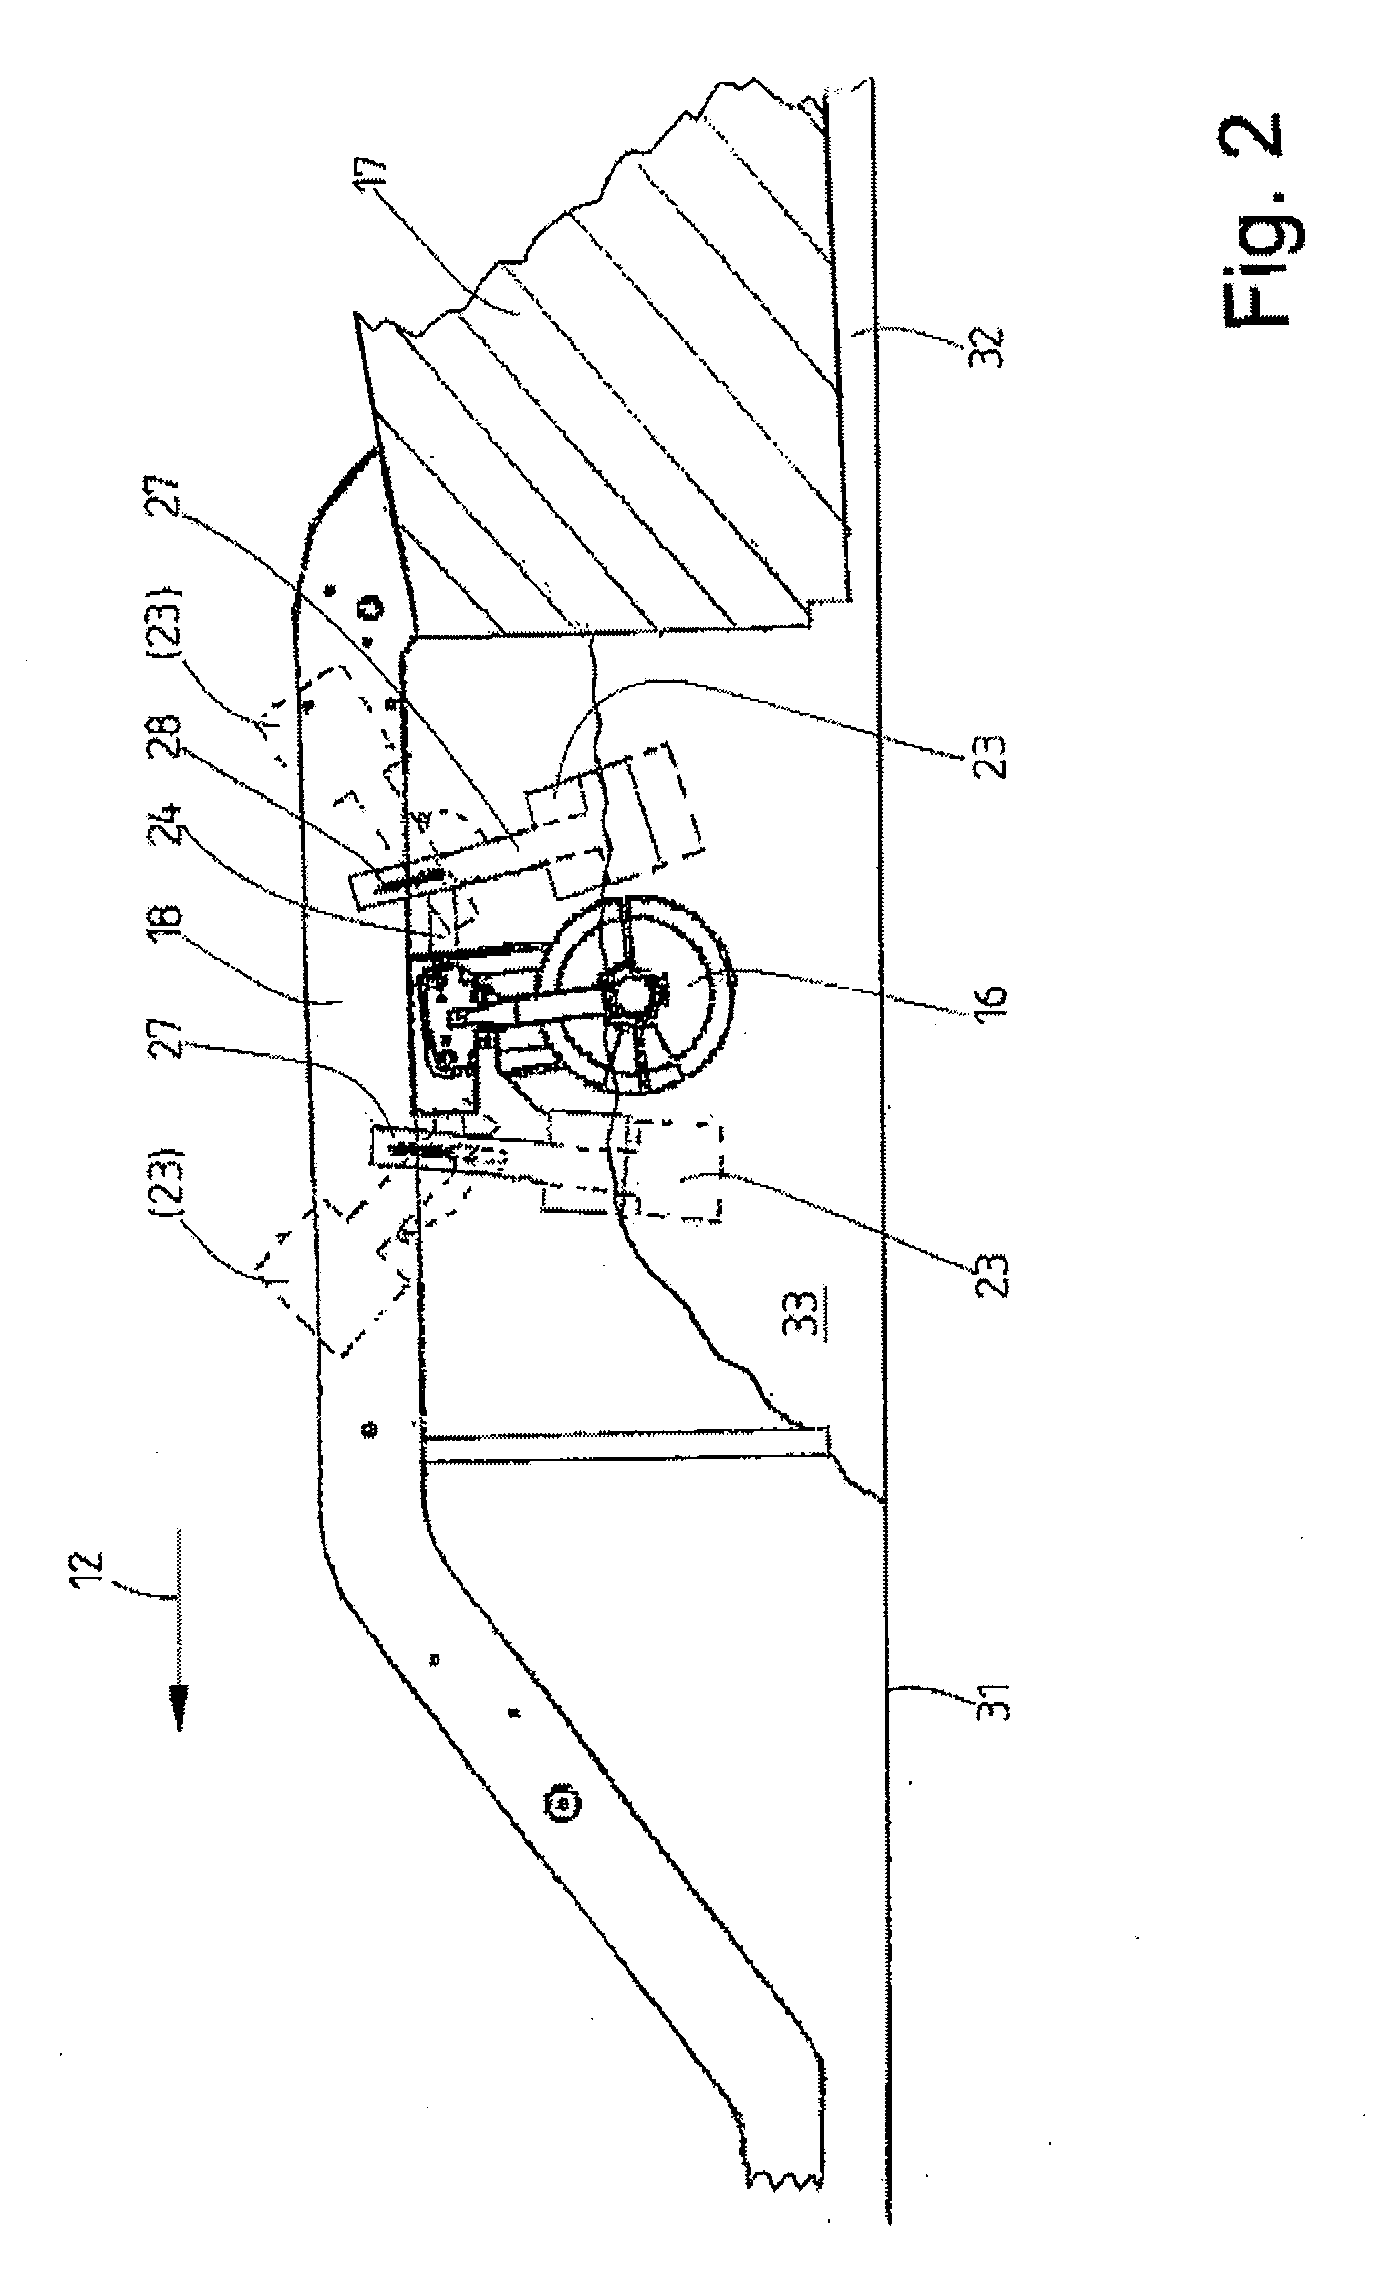 Method for Producing a Road Surface, Preferably a concrete road surface, and road paver